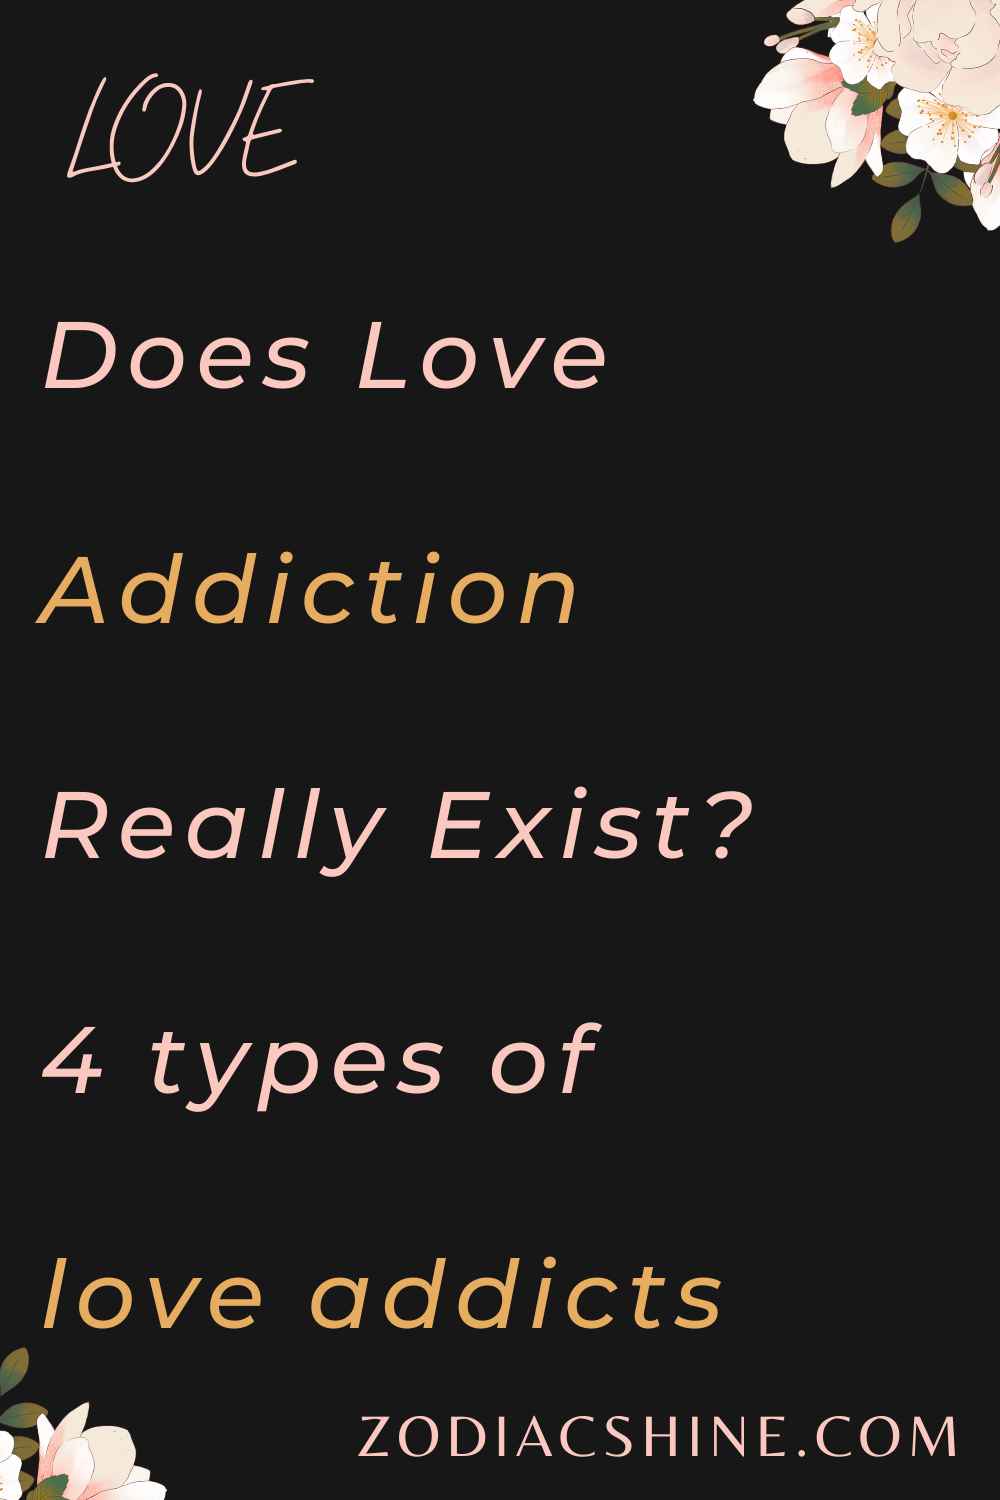 Does Love Addiction Really Exist? 4 types of love addicts